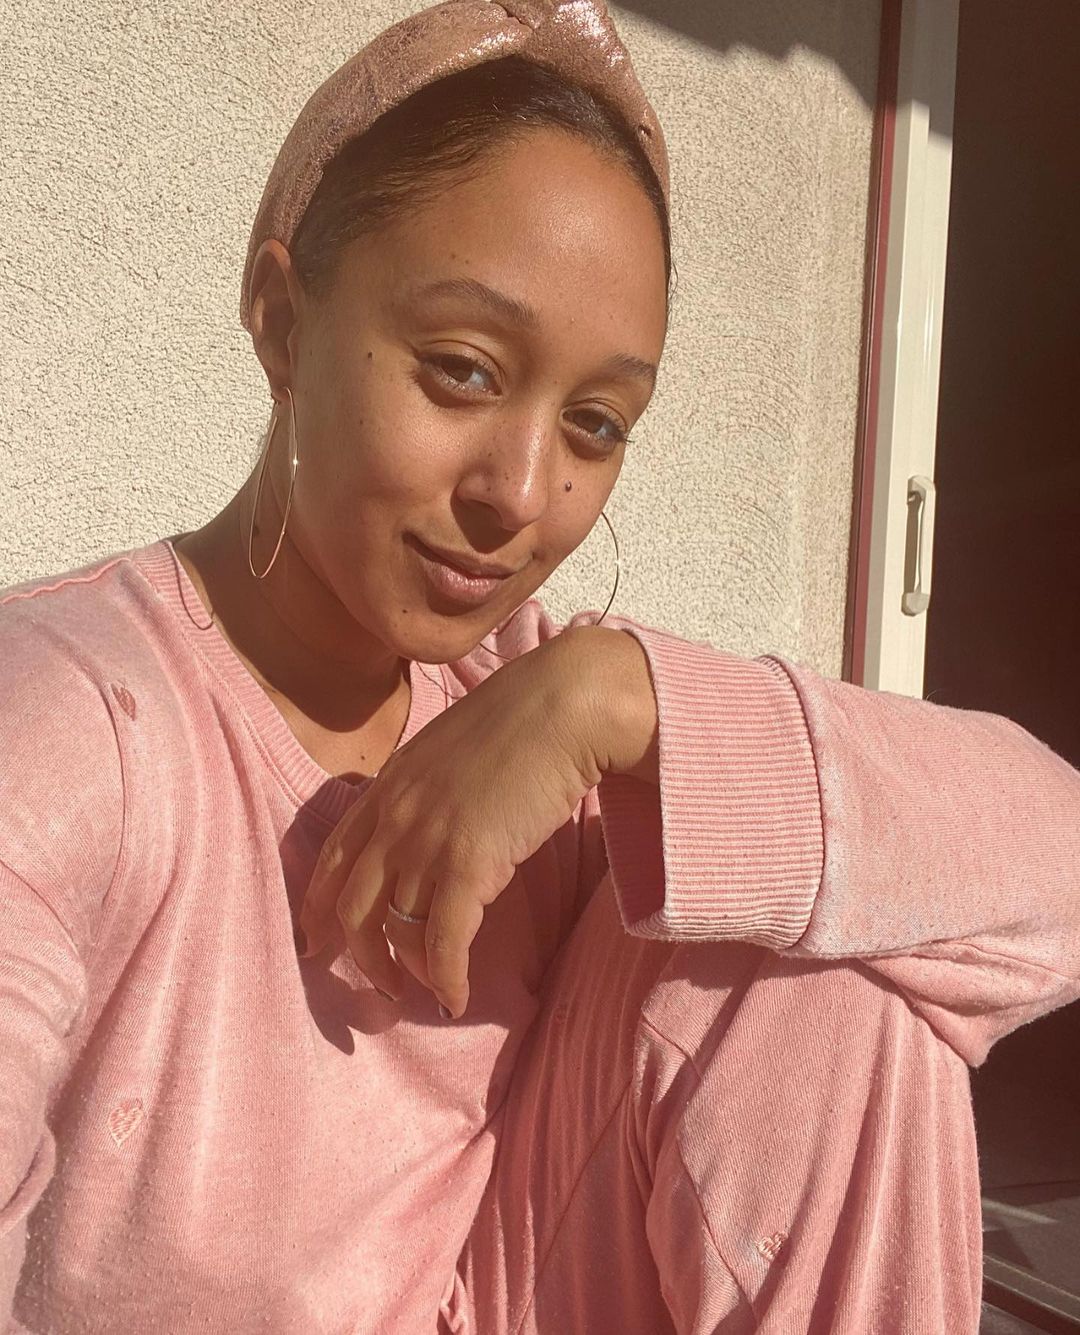 An amazing photo showing Tamera Mowry-Housley in a plain pink two-piece outfit, soaking up the sun and she looks incredible.